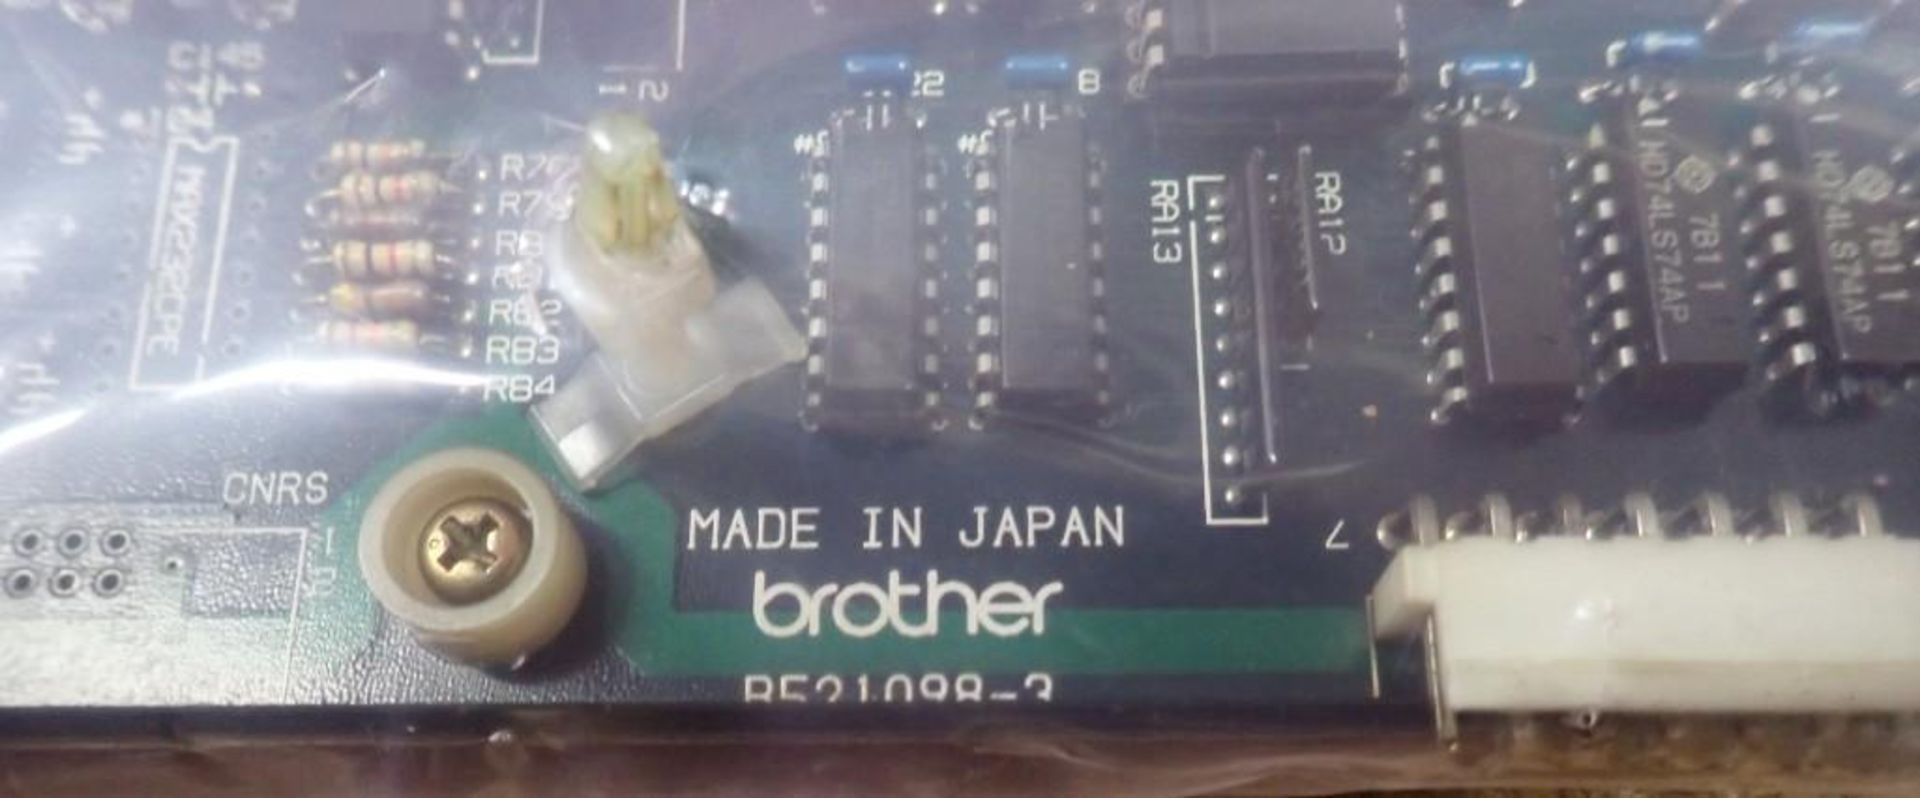 Brother #B521098-3 Circuit Board - Image 4 of 6